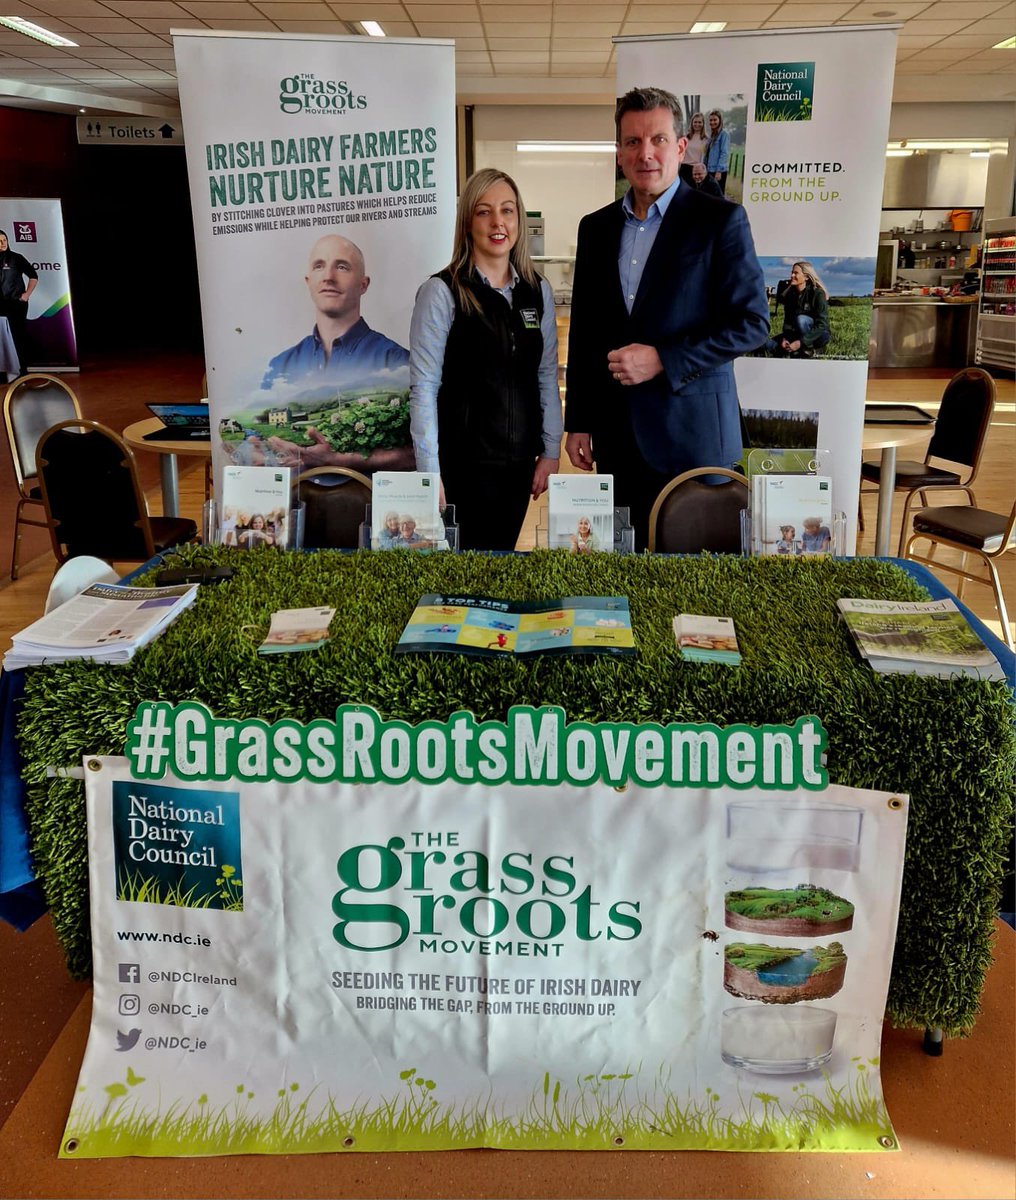 We’re delighted to attend @DairygoldCo_Op dairy farming event ‘A Positive Future’ in Fermoy today. Come visit our stand to chat with Majella McCafferty and Mark Keller 🐄🌱 #IrishDairy #Event #DairyFarming #APositiveFuture